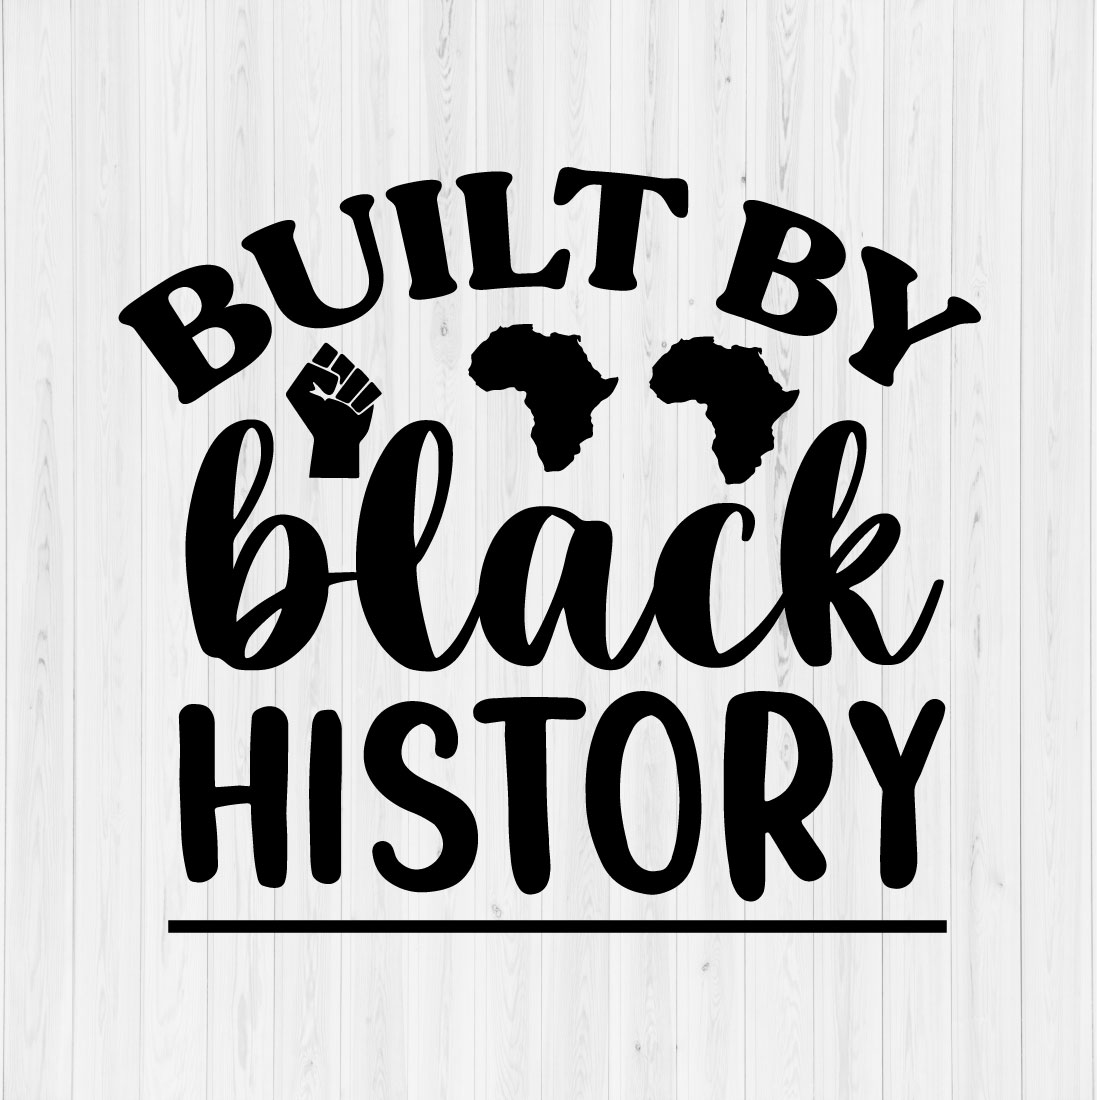 Built By Black History preview image.